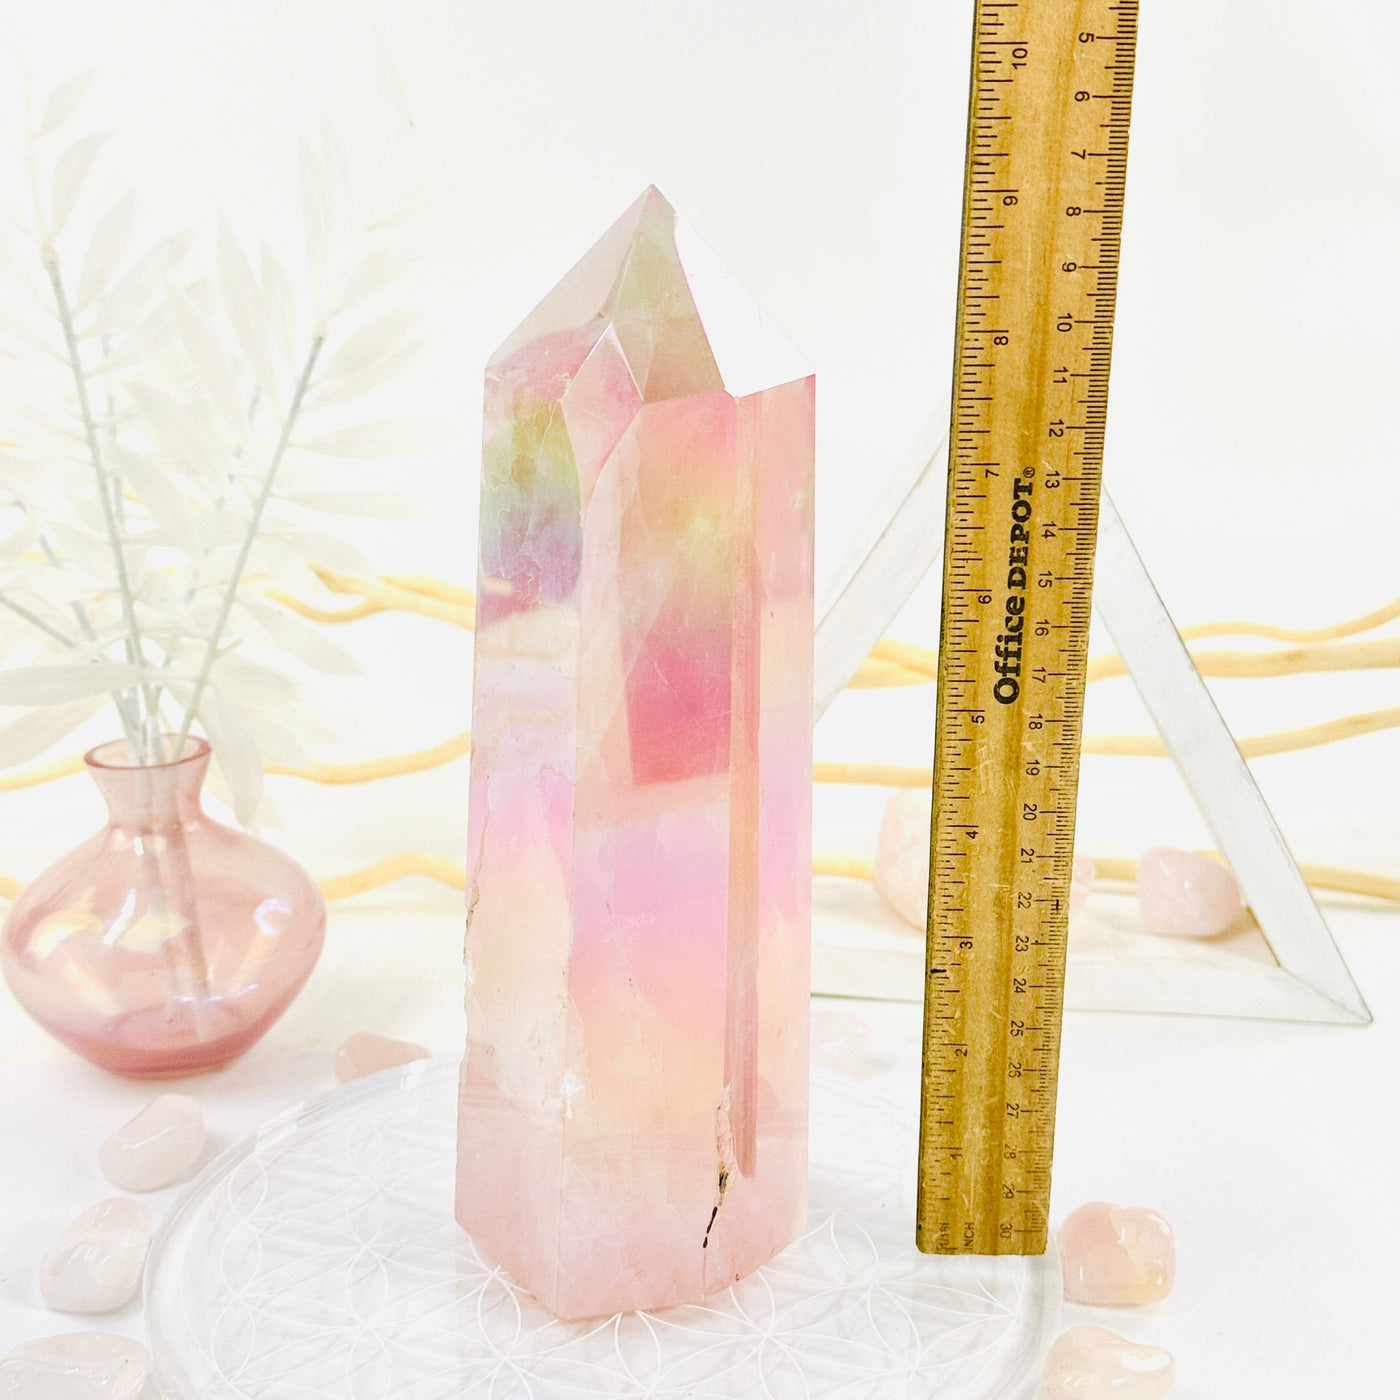 Angel Aura Rose Quartz Obelisk with Natural Inclusions with ruler for size reference